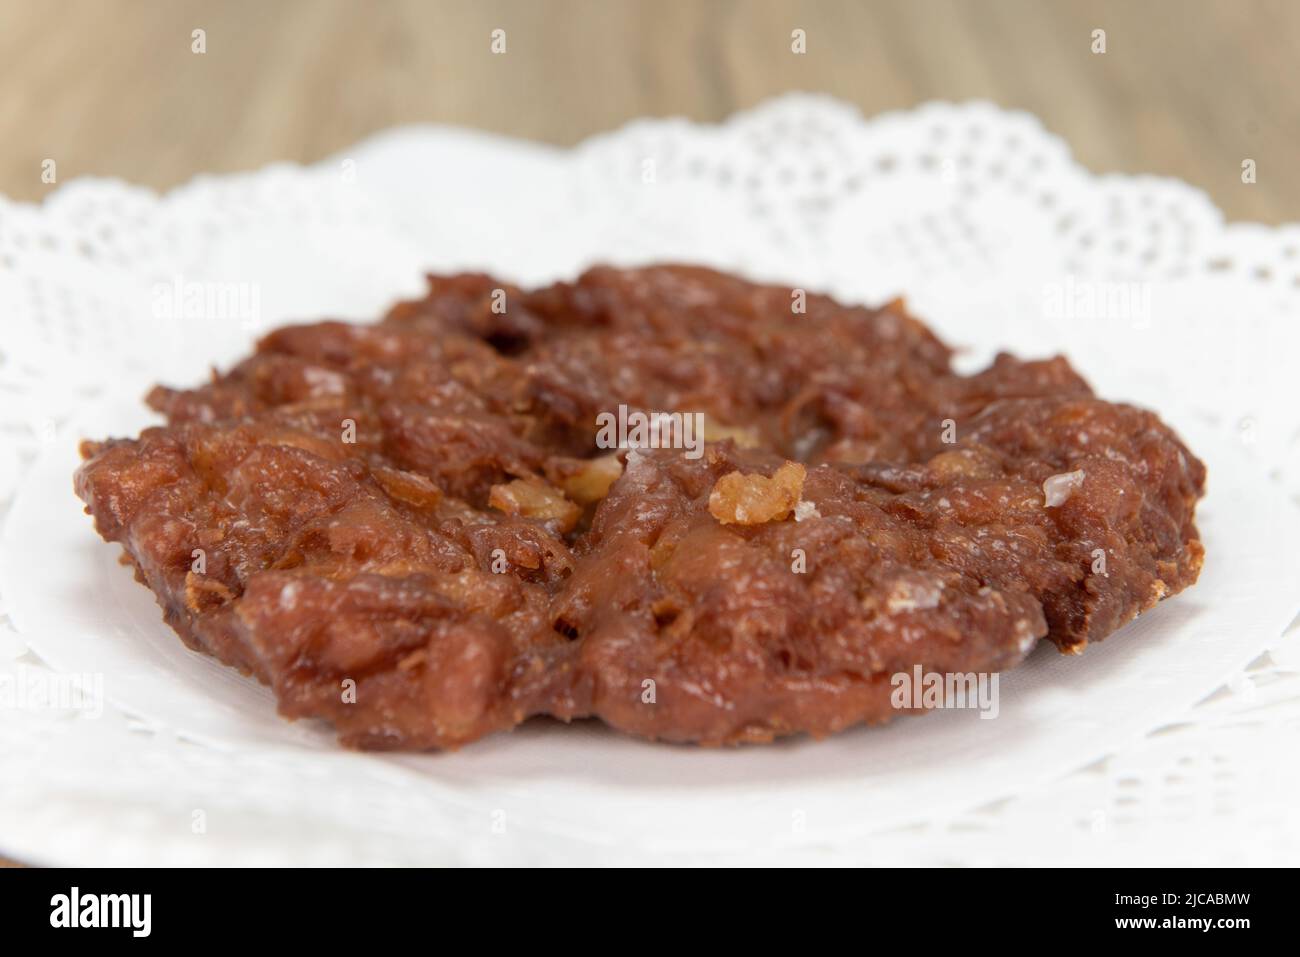 Tempting fresh from the oven apple fritter donut from the bakery served on a plate. Stock Photo